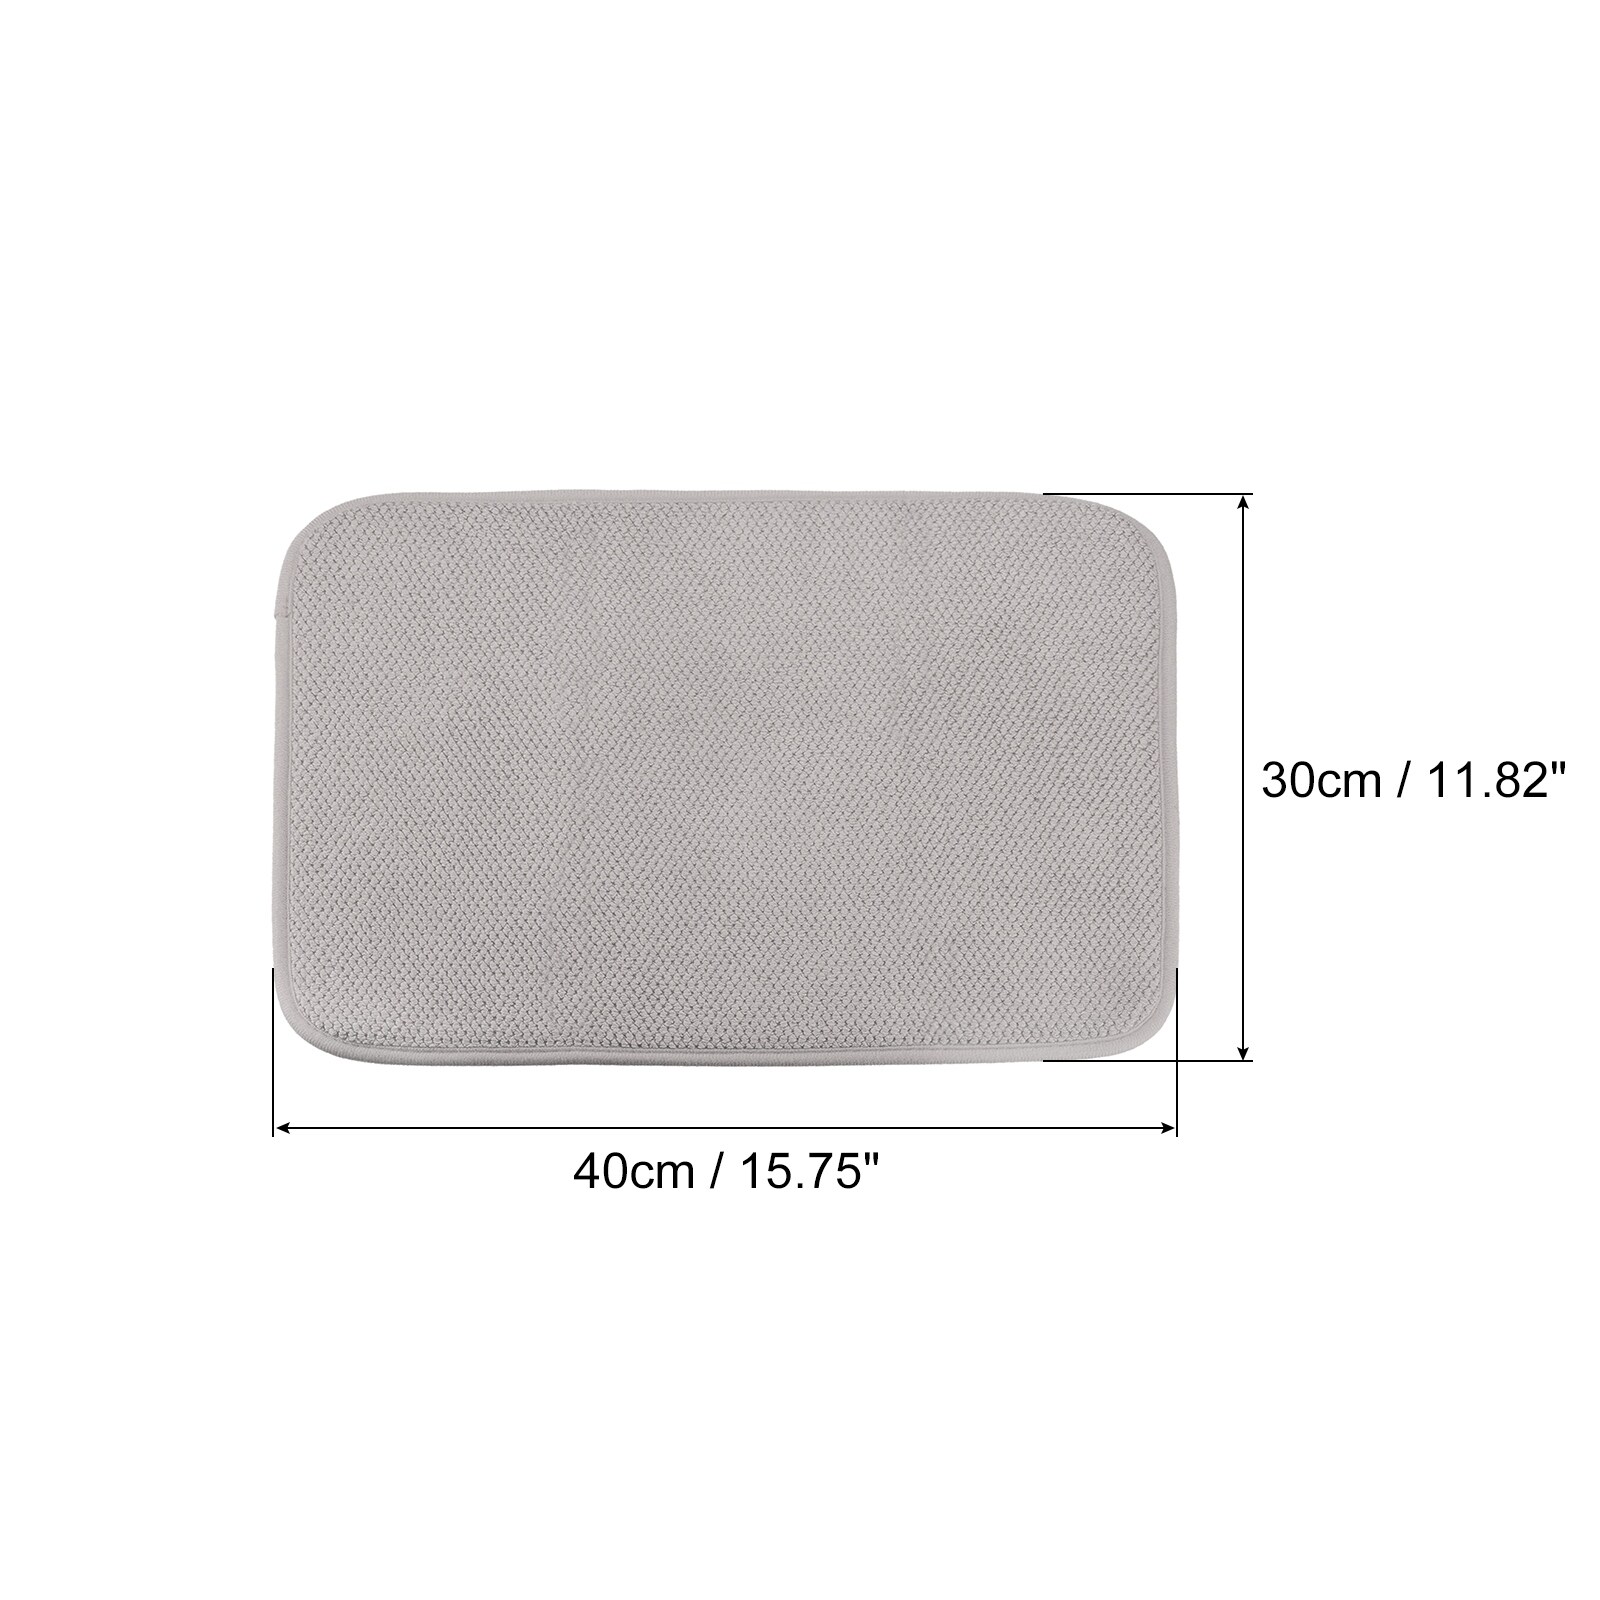 https://ak1.ostkcdn.com/images/products/is/images/direct/c6a16960b3f478b1caa2773d4068b0eb029fd370/Microfiber-Dish-Drying-Mat%2C-15.75%22-x-11.82%22-Dishes-Drainer-Mats-Red.jpg